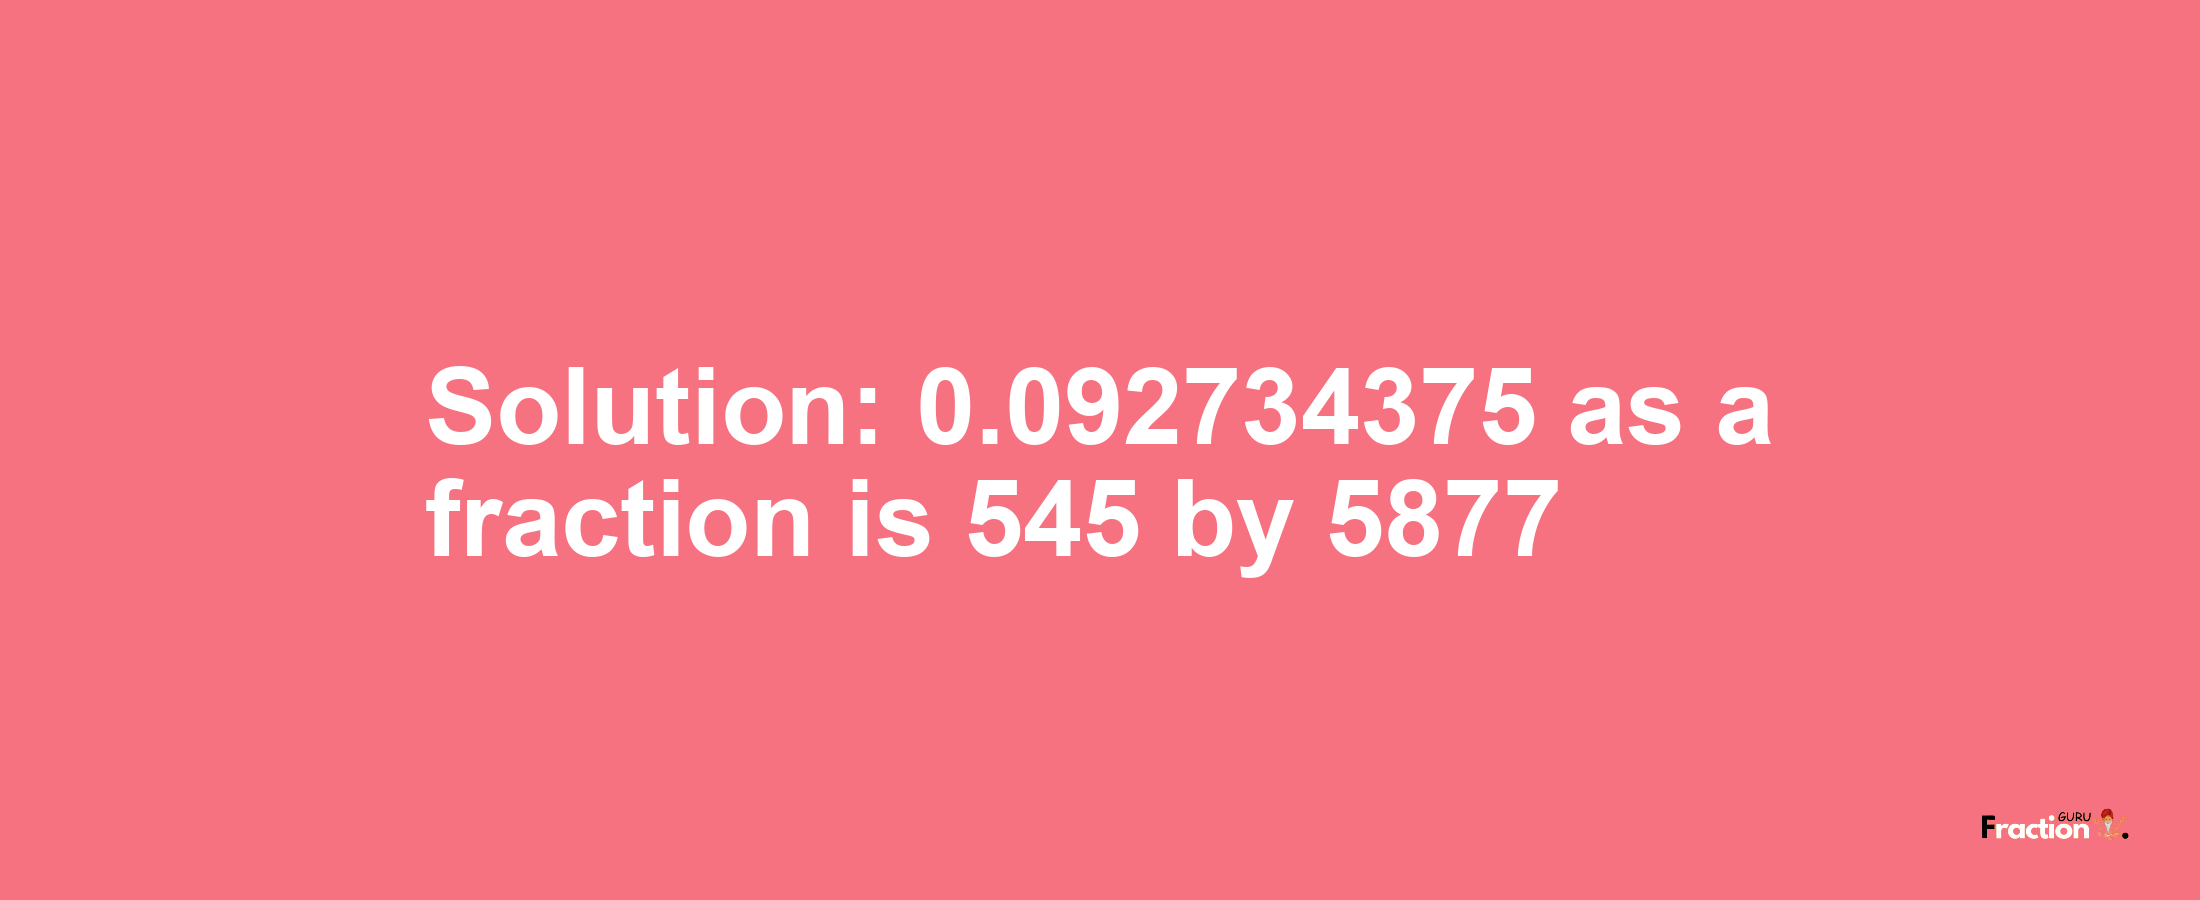 Solution:0.092734375 as a fraction is 545/5877